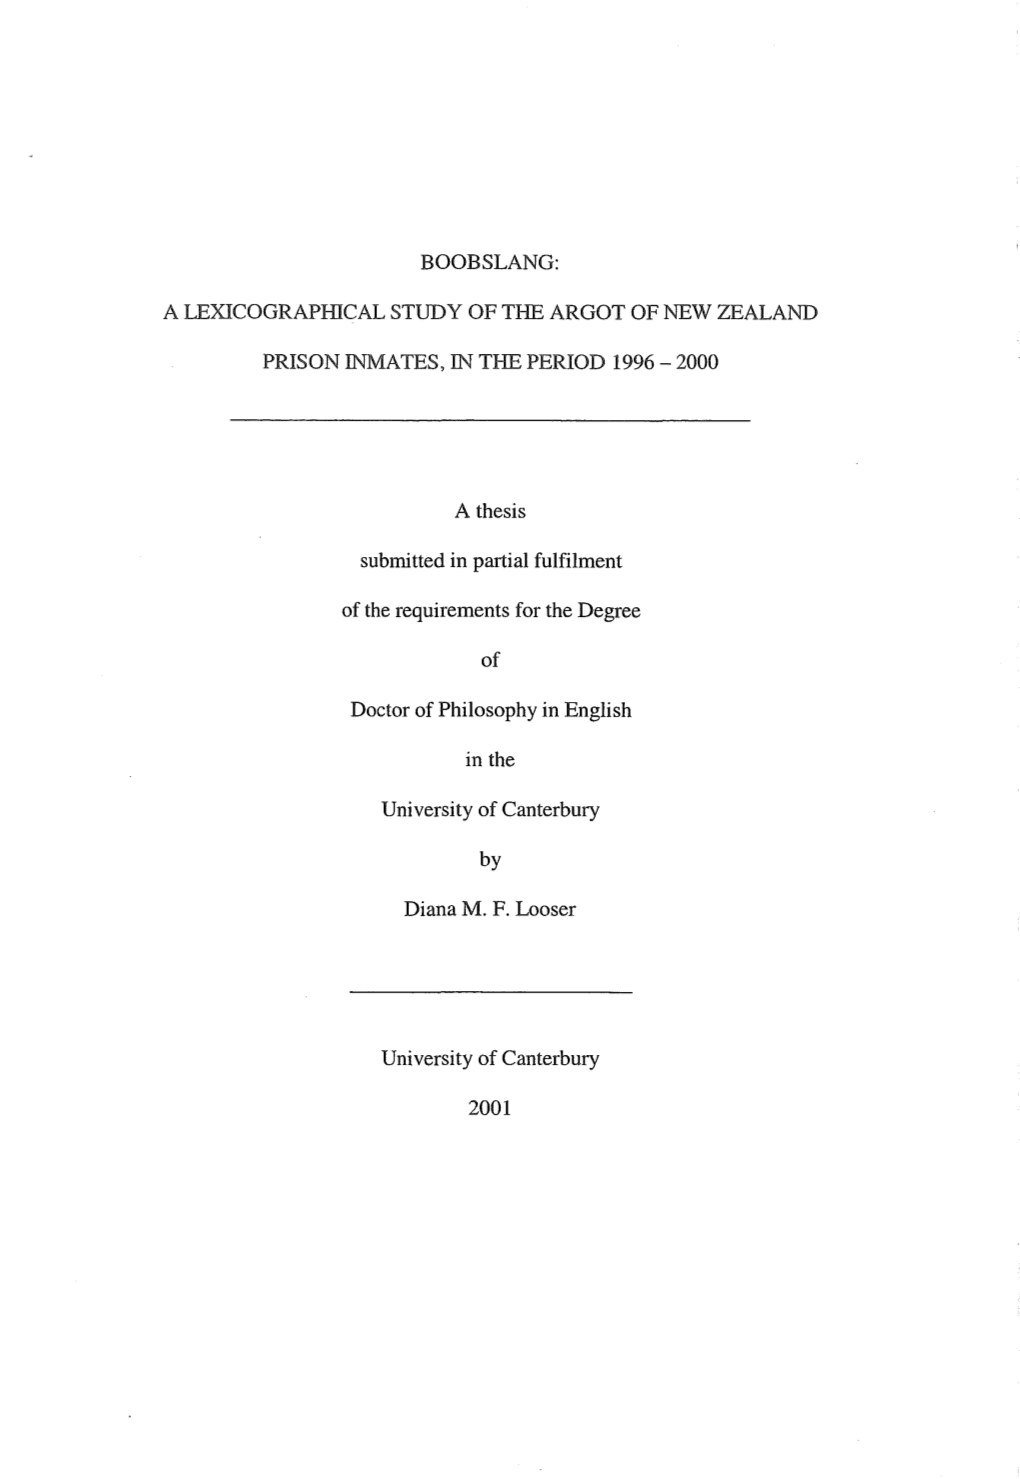 A Lexicographical Study of the Argot of New Zealand Prison Inmates in the Period 1996-2000